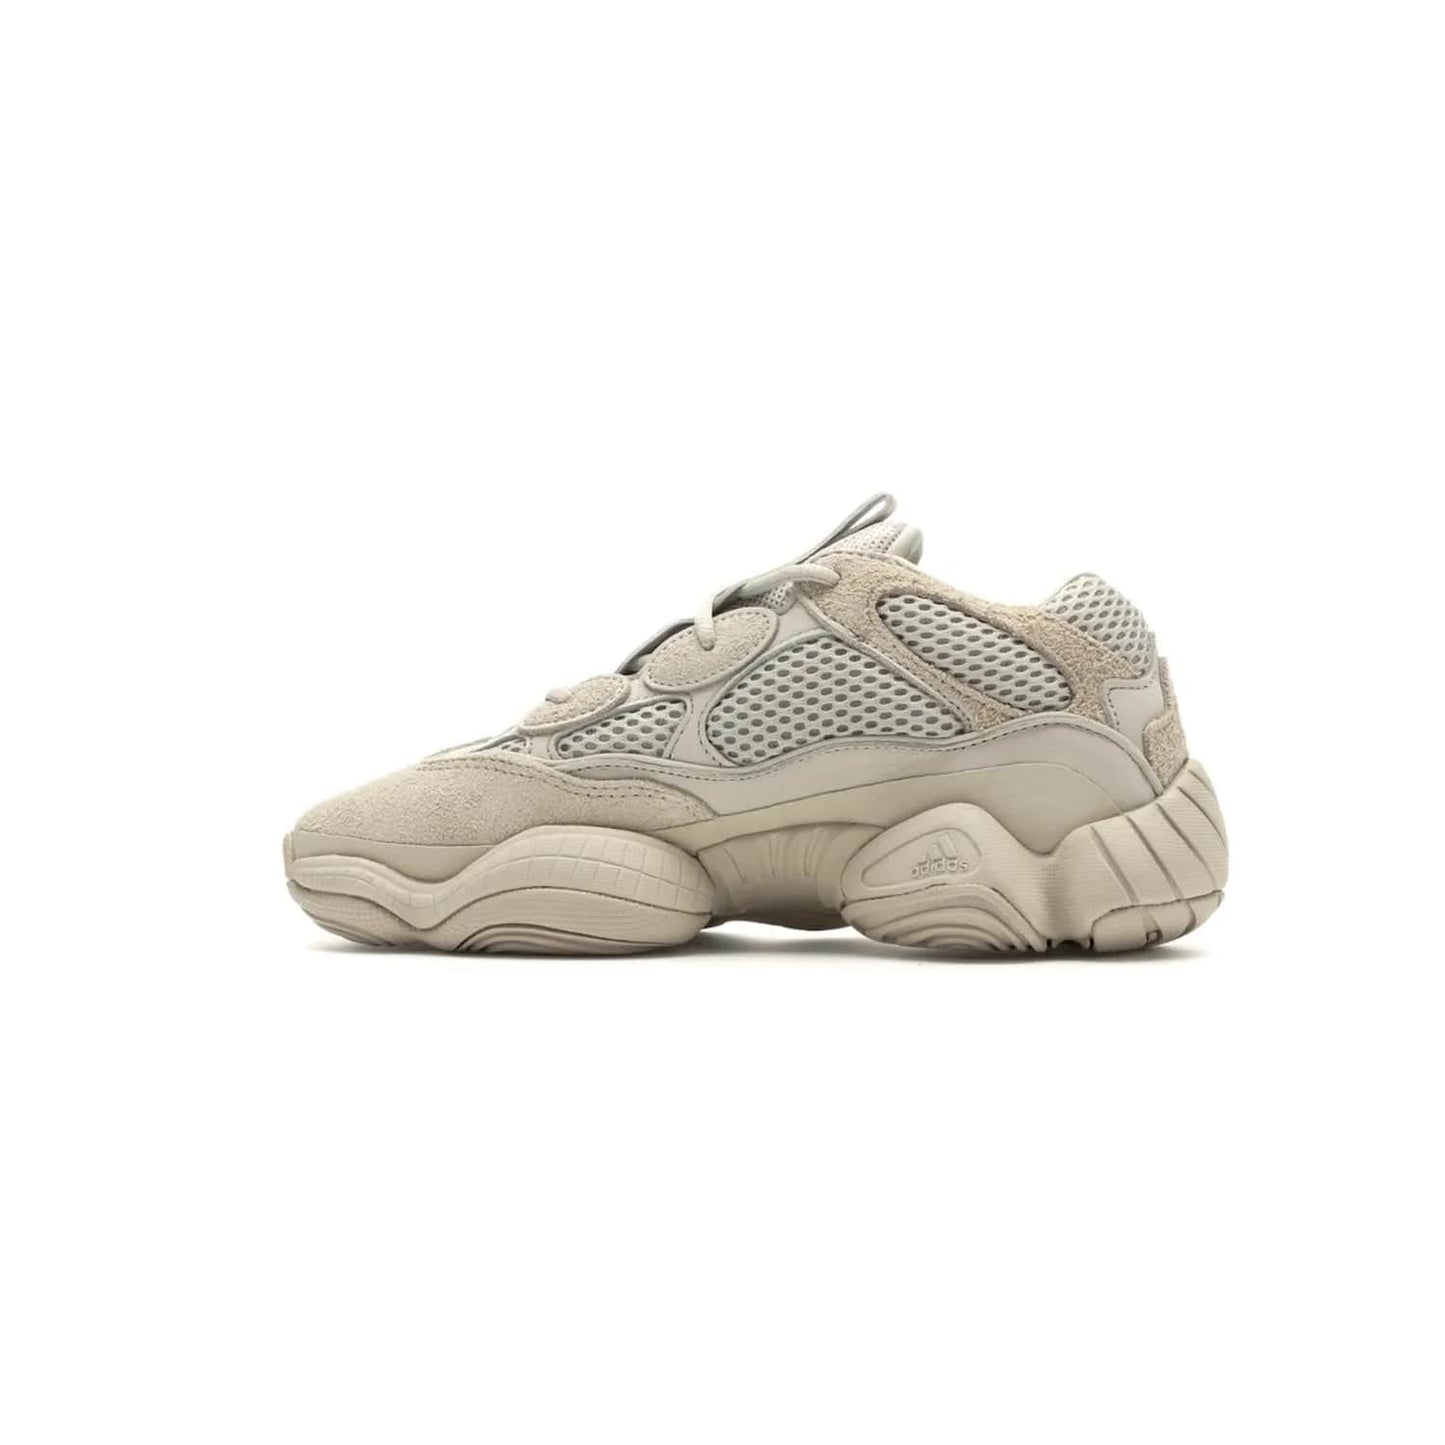 adidas Yeezy 500 Blush - Image 20 - Only at www.BallersClubKickz.com - Step up your sneaker game with the Adidas Yeezy 500 Blush. Monochromatic pale pink palette, hiking-inspired suede/mesh construction, plus adiPRENE sole for comfort and performance. Get the Adidas Yeezy 500 and experience true style and comfort.